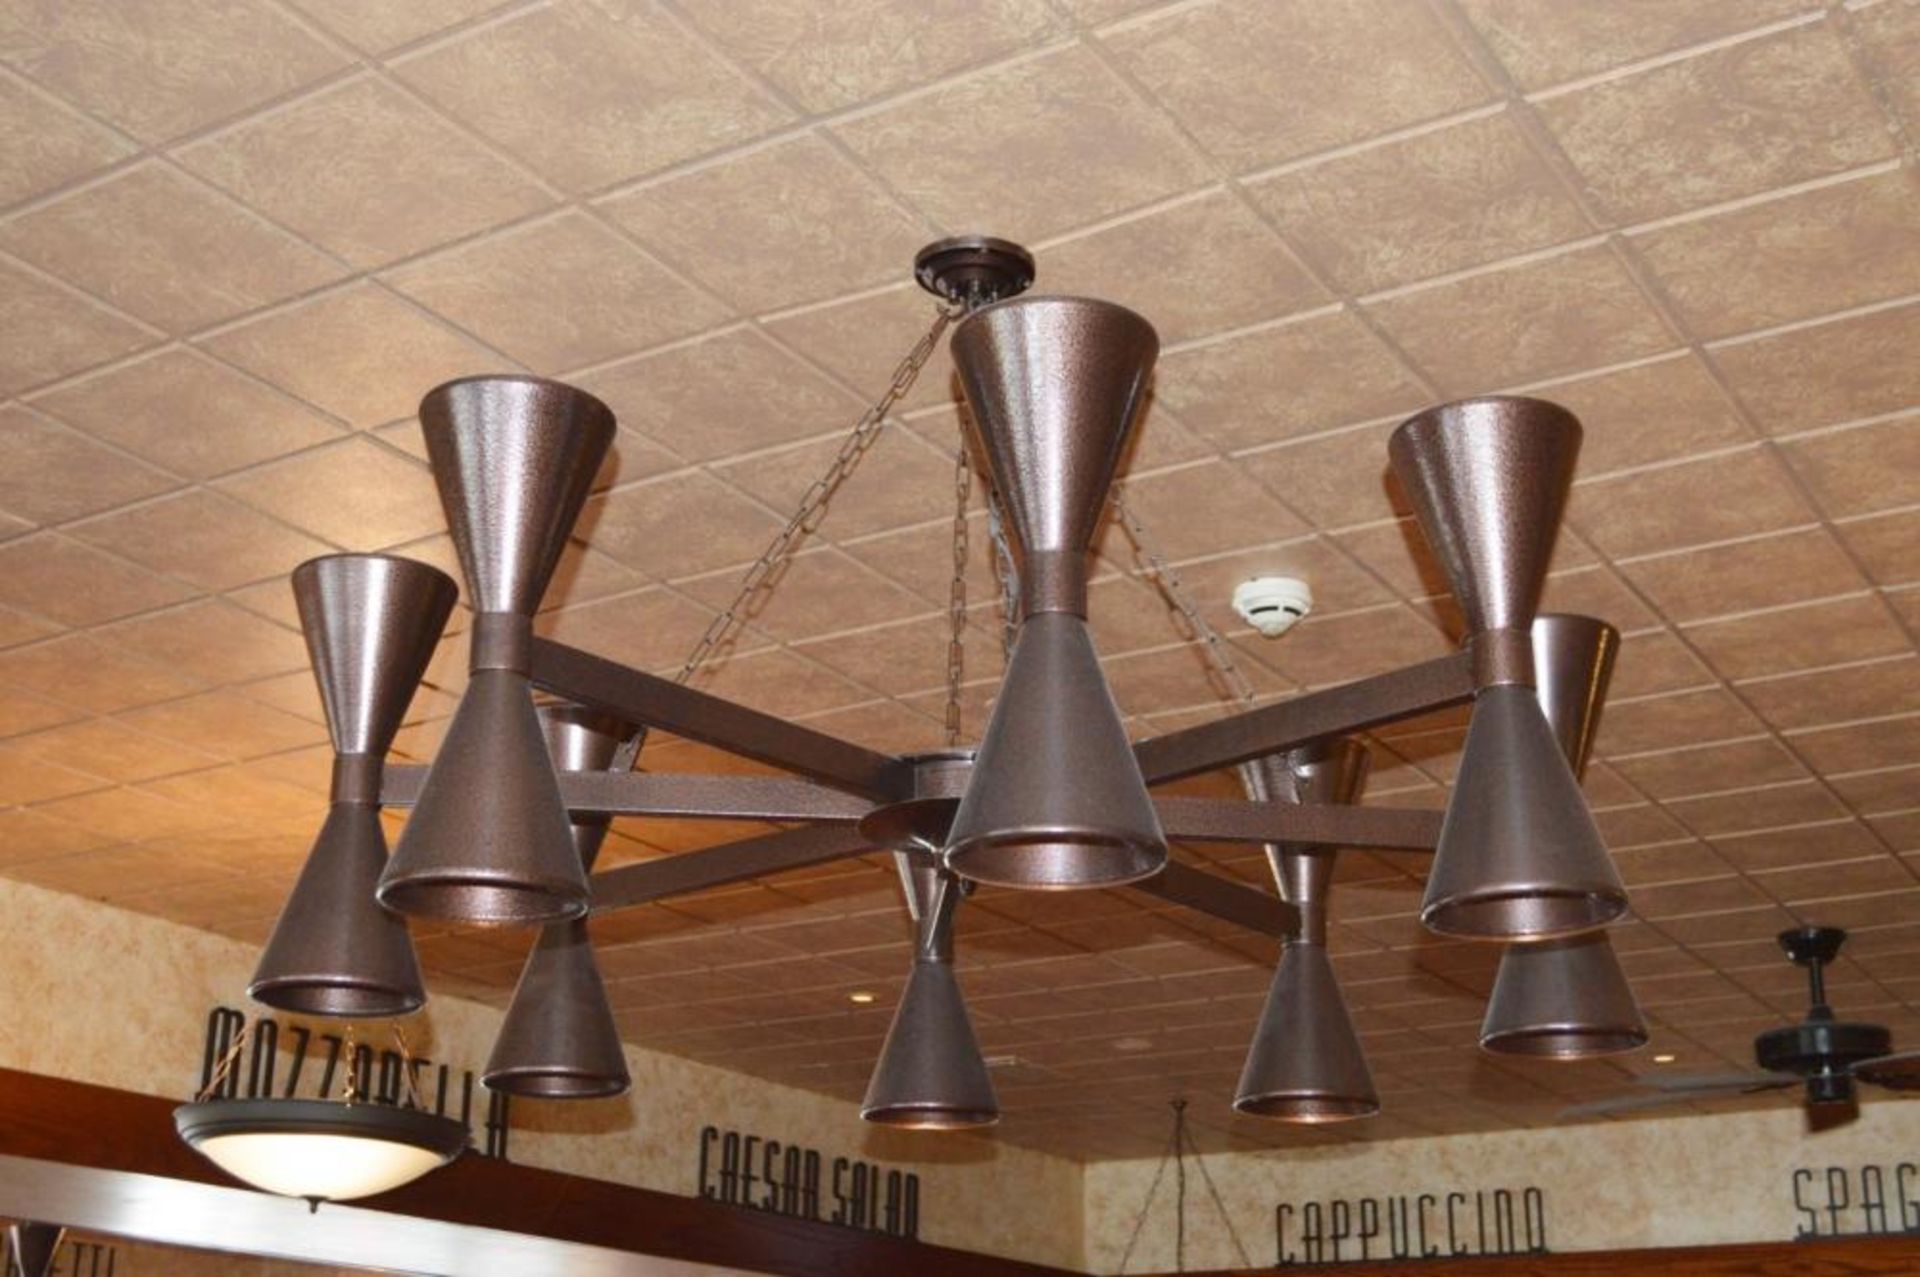 1 x Large and Impressive 8 Arm Chandelier Light Fitting With Brown Pitted Finish - Approx Dimension - Image 2 of 5